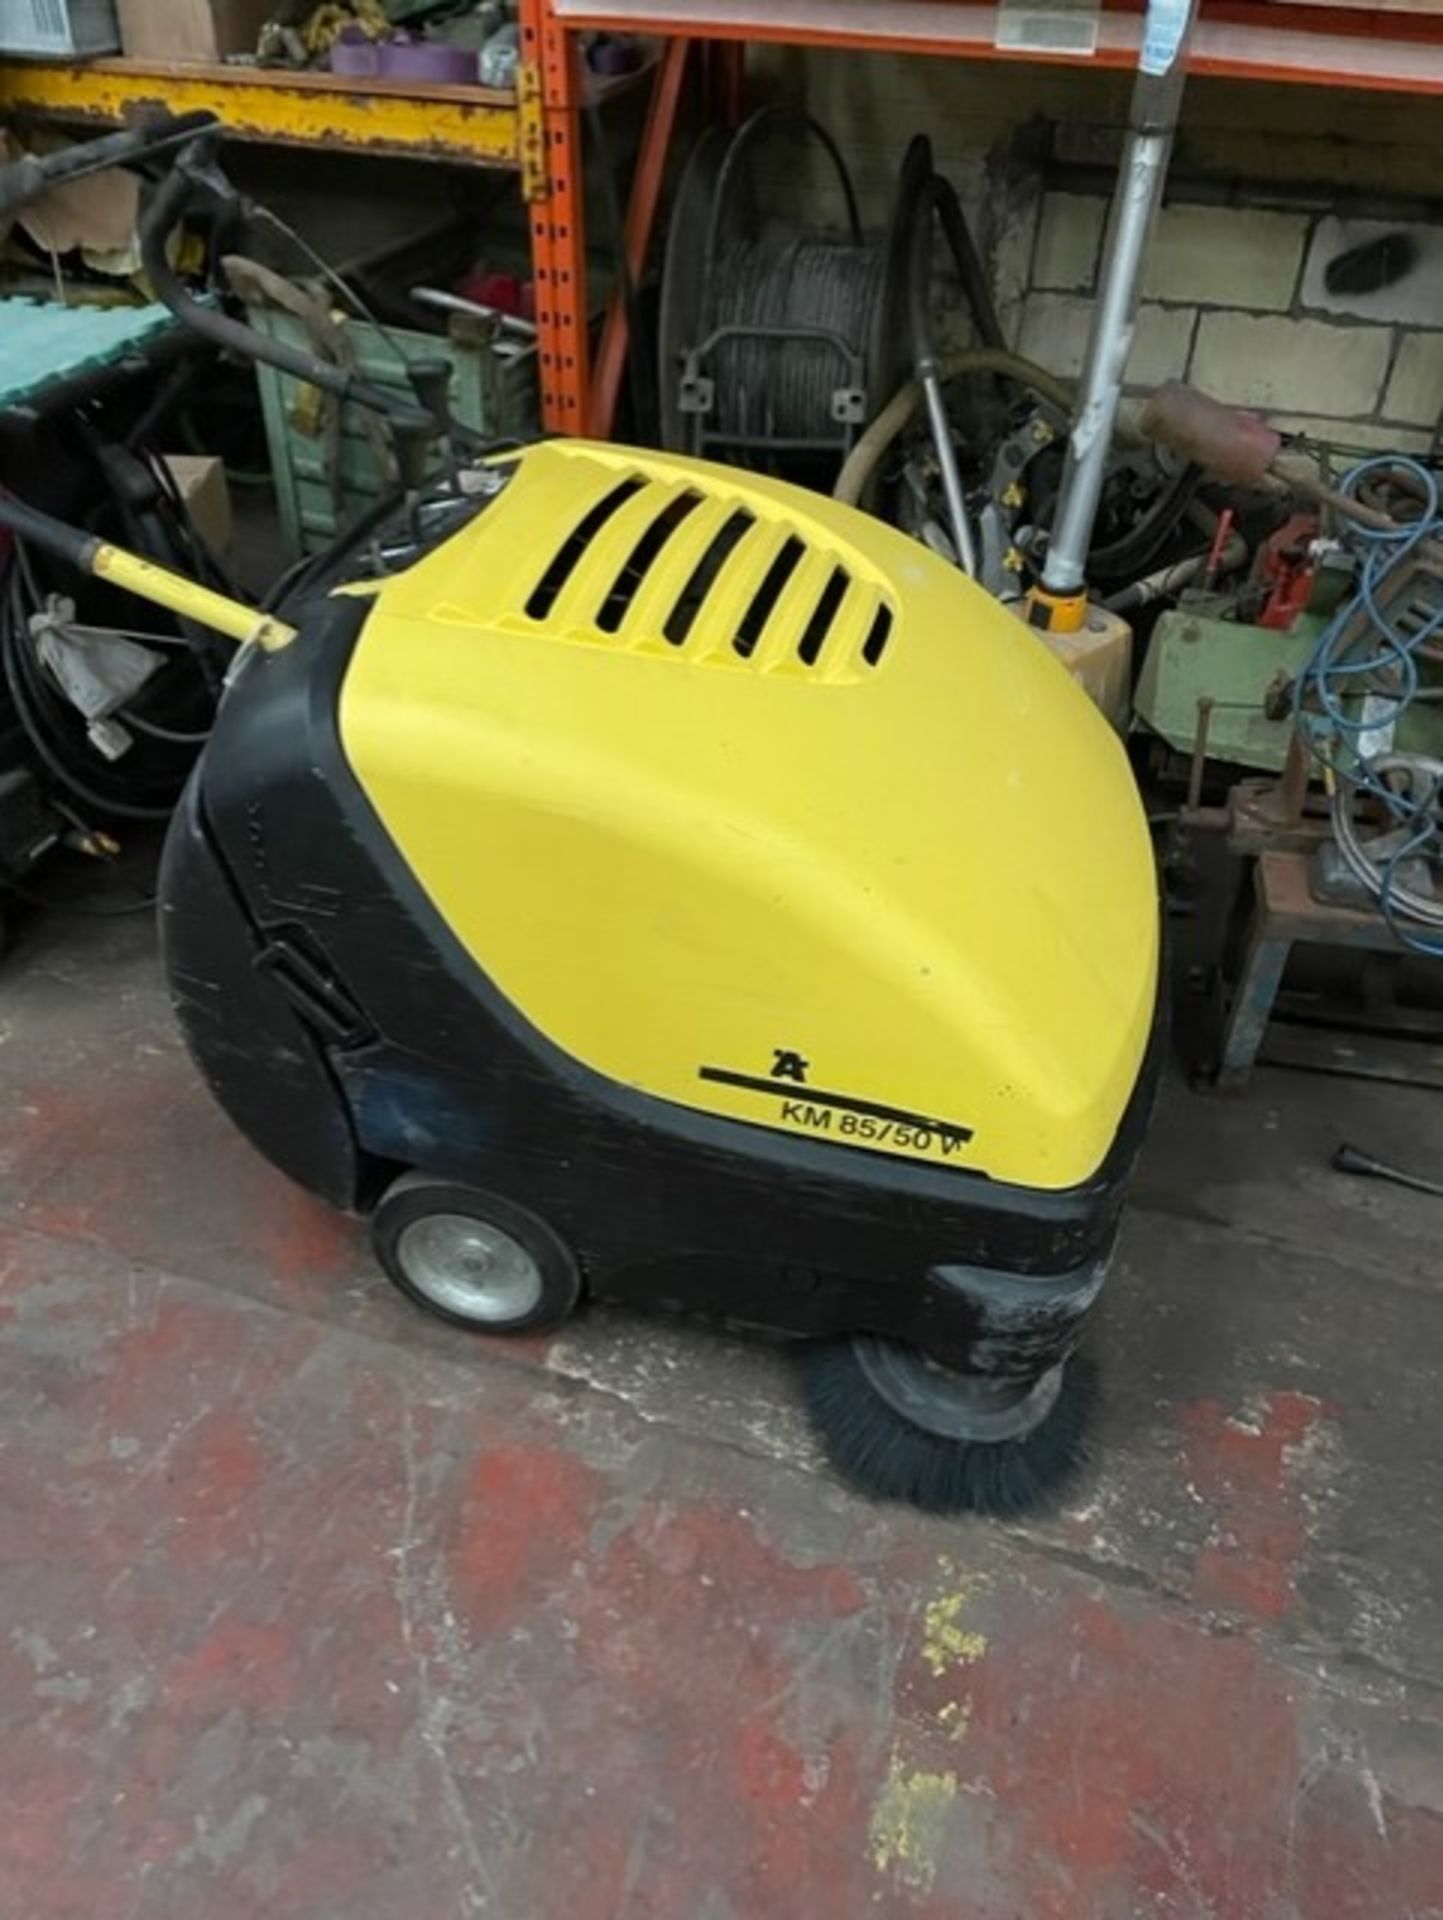 Looking tidy a karcher floor sweeper has a gx 160 engine on it  quite a bulky thing